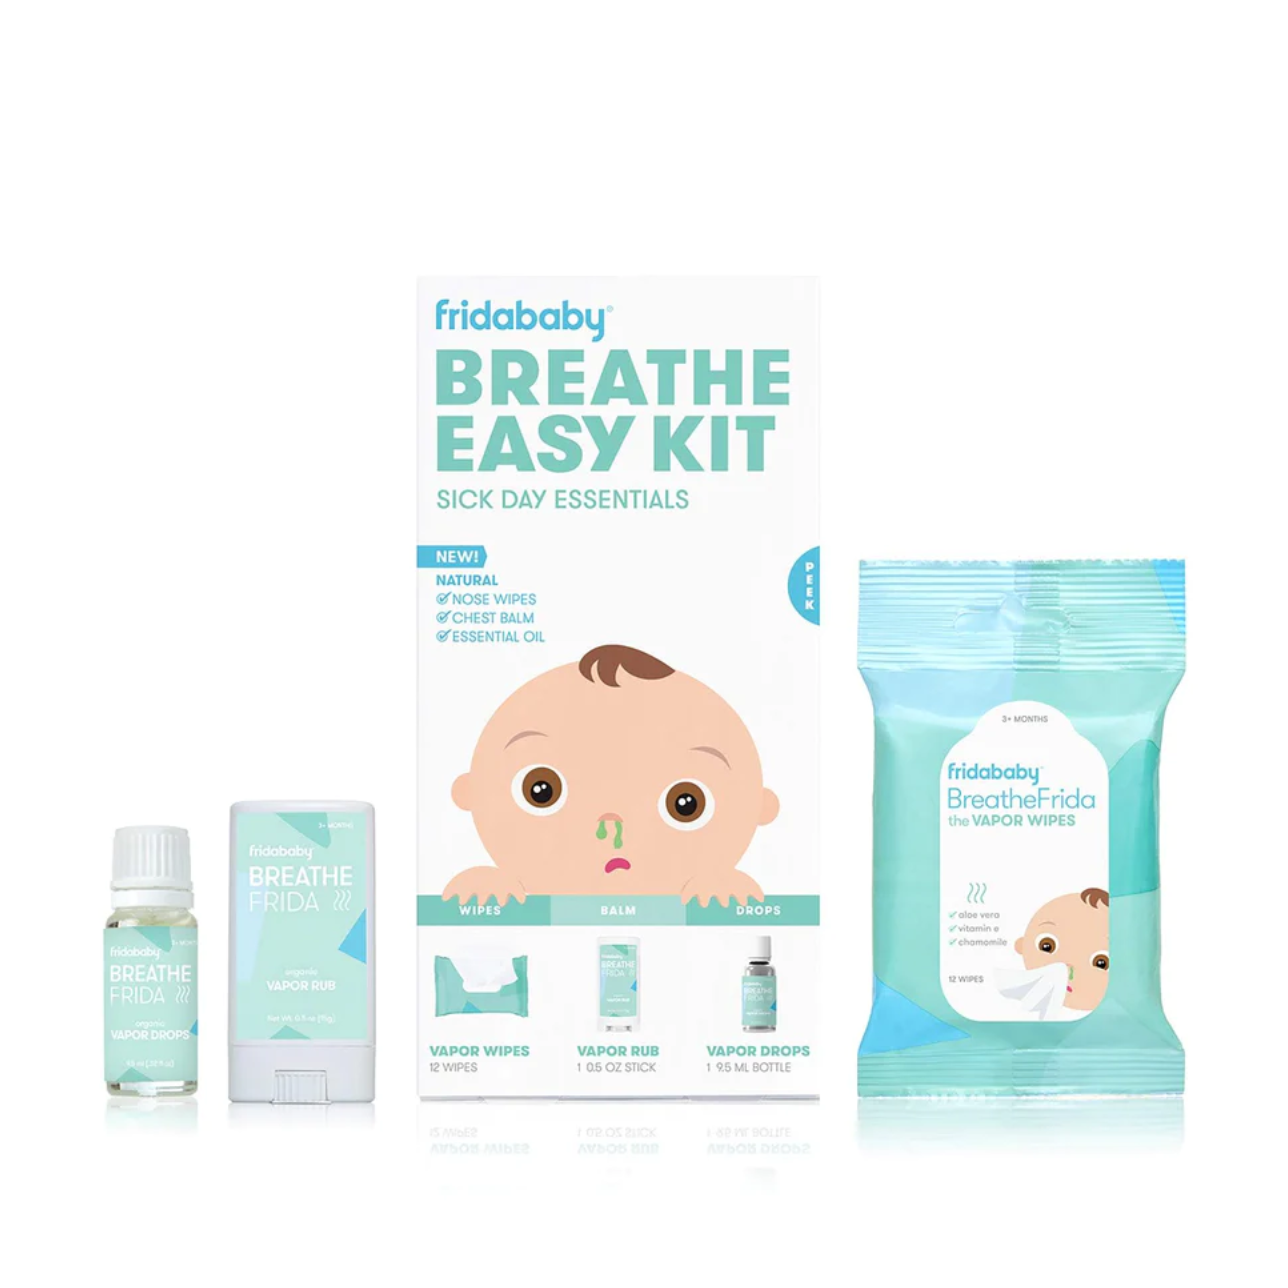 Breathe Easy Kit - The Sick Day Essentials